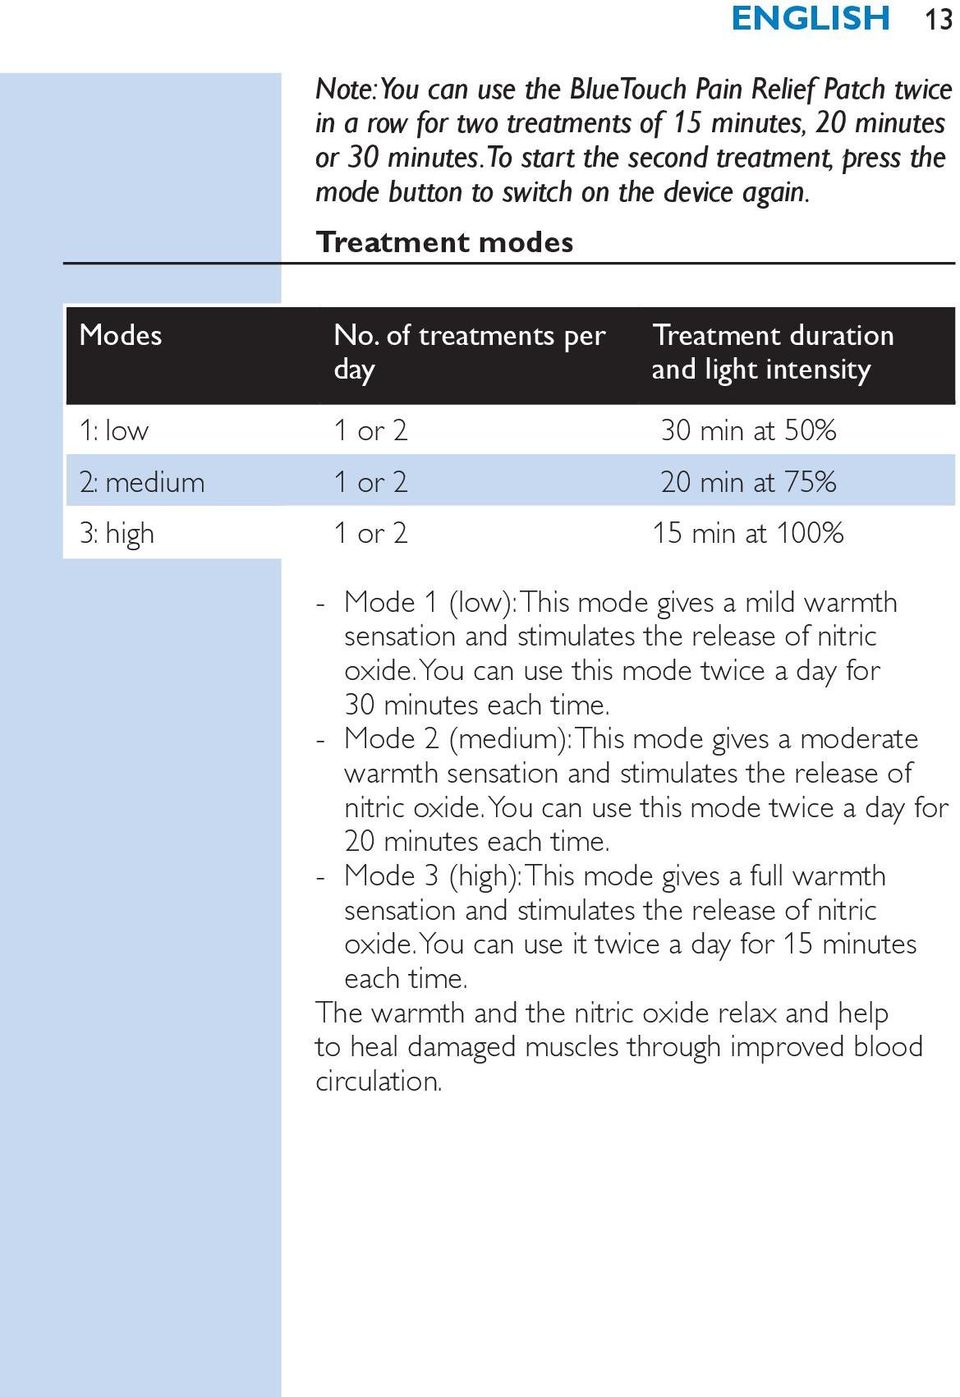 of treatments per day Treatment duration and light intensity 1: low 1 or 2 30 min at 50% 2: medium 1 or 2 20 min at 75% 3: high 1 or 2 15 min at 100% Mode 1 (low): This mode gives a mild warmth